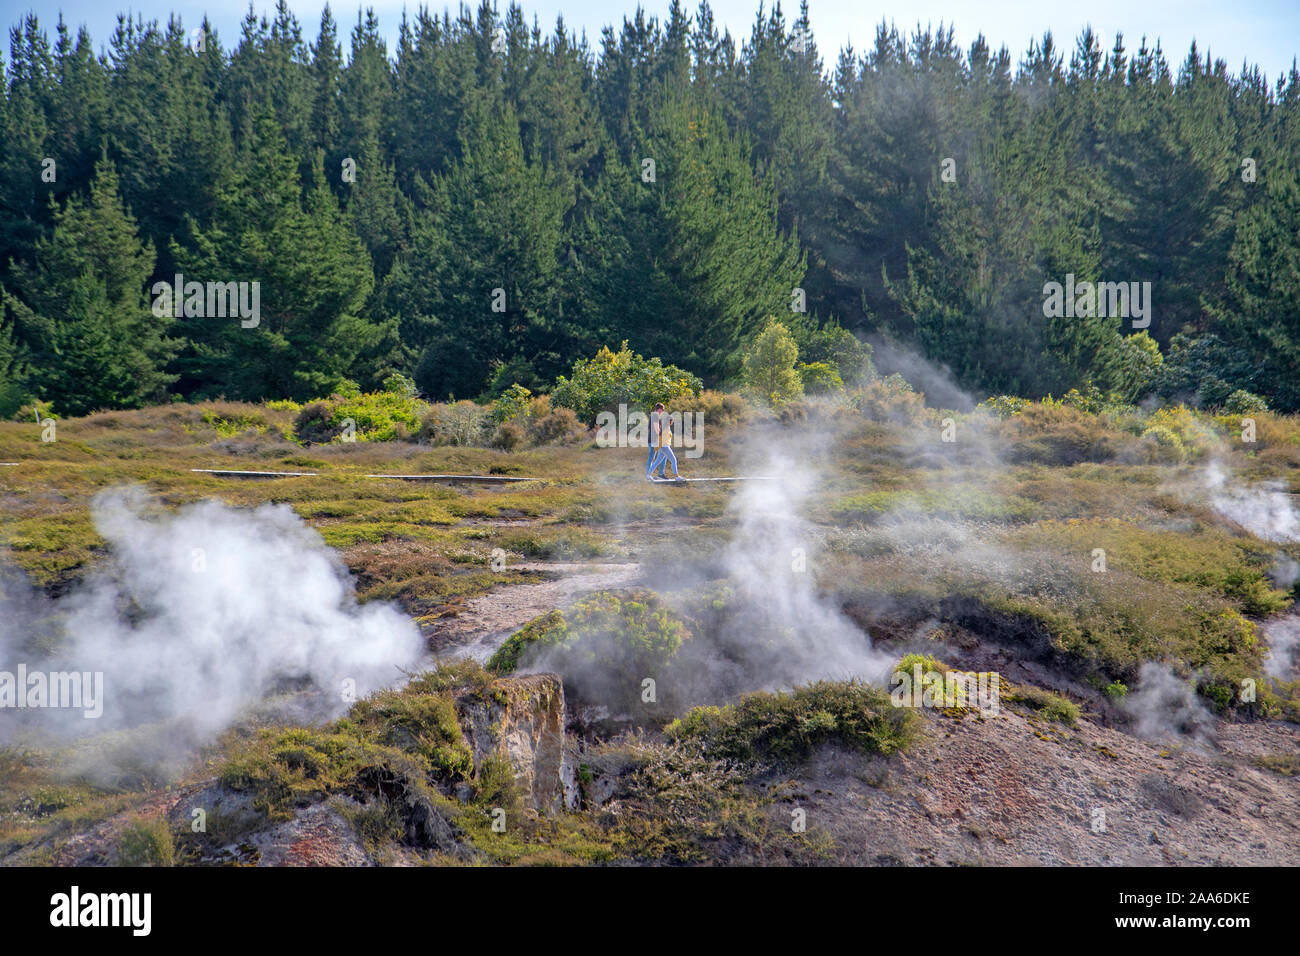 Steam pours from craters at the Craters of the Moon geothermal field Stock Photo